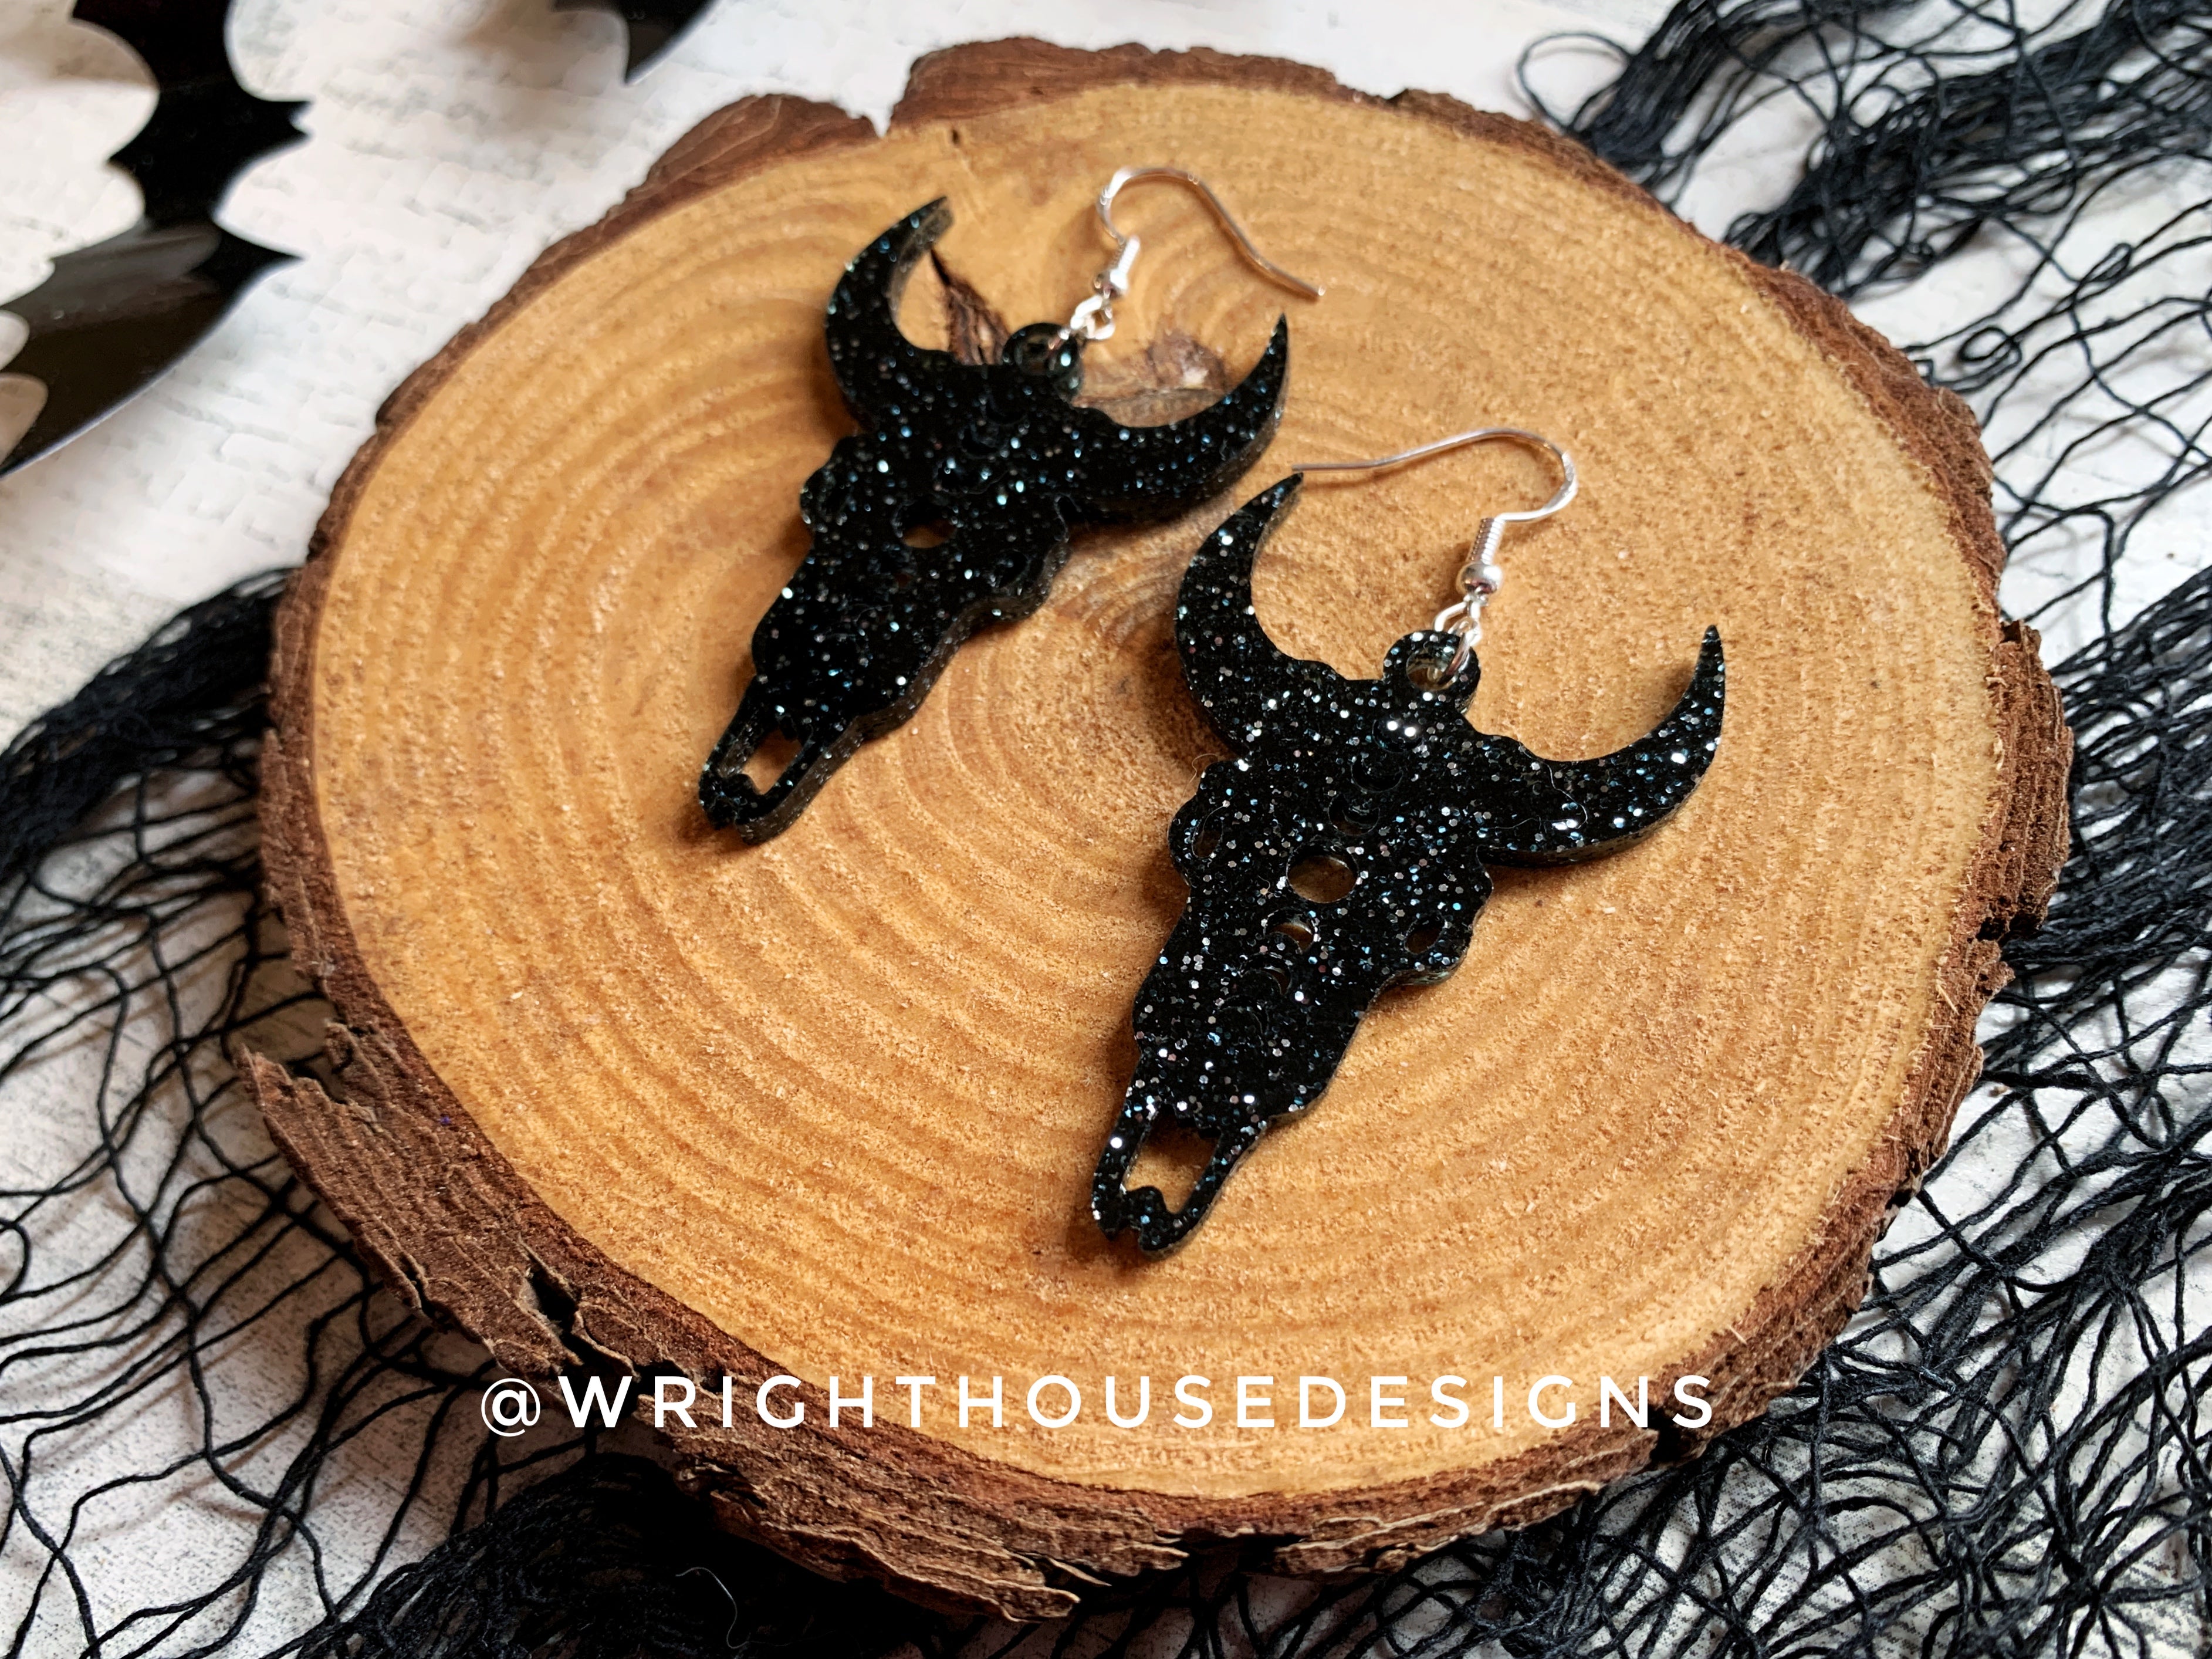 Gothic Style Cow Skulls - Witchy Halloween Earrings - Glitter Black Acrylic Handmade Jewelry